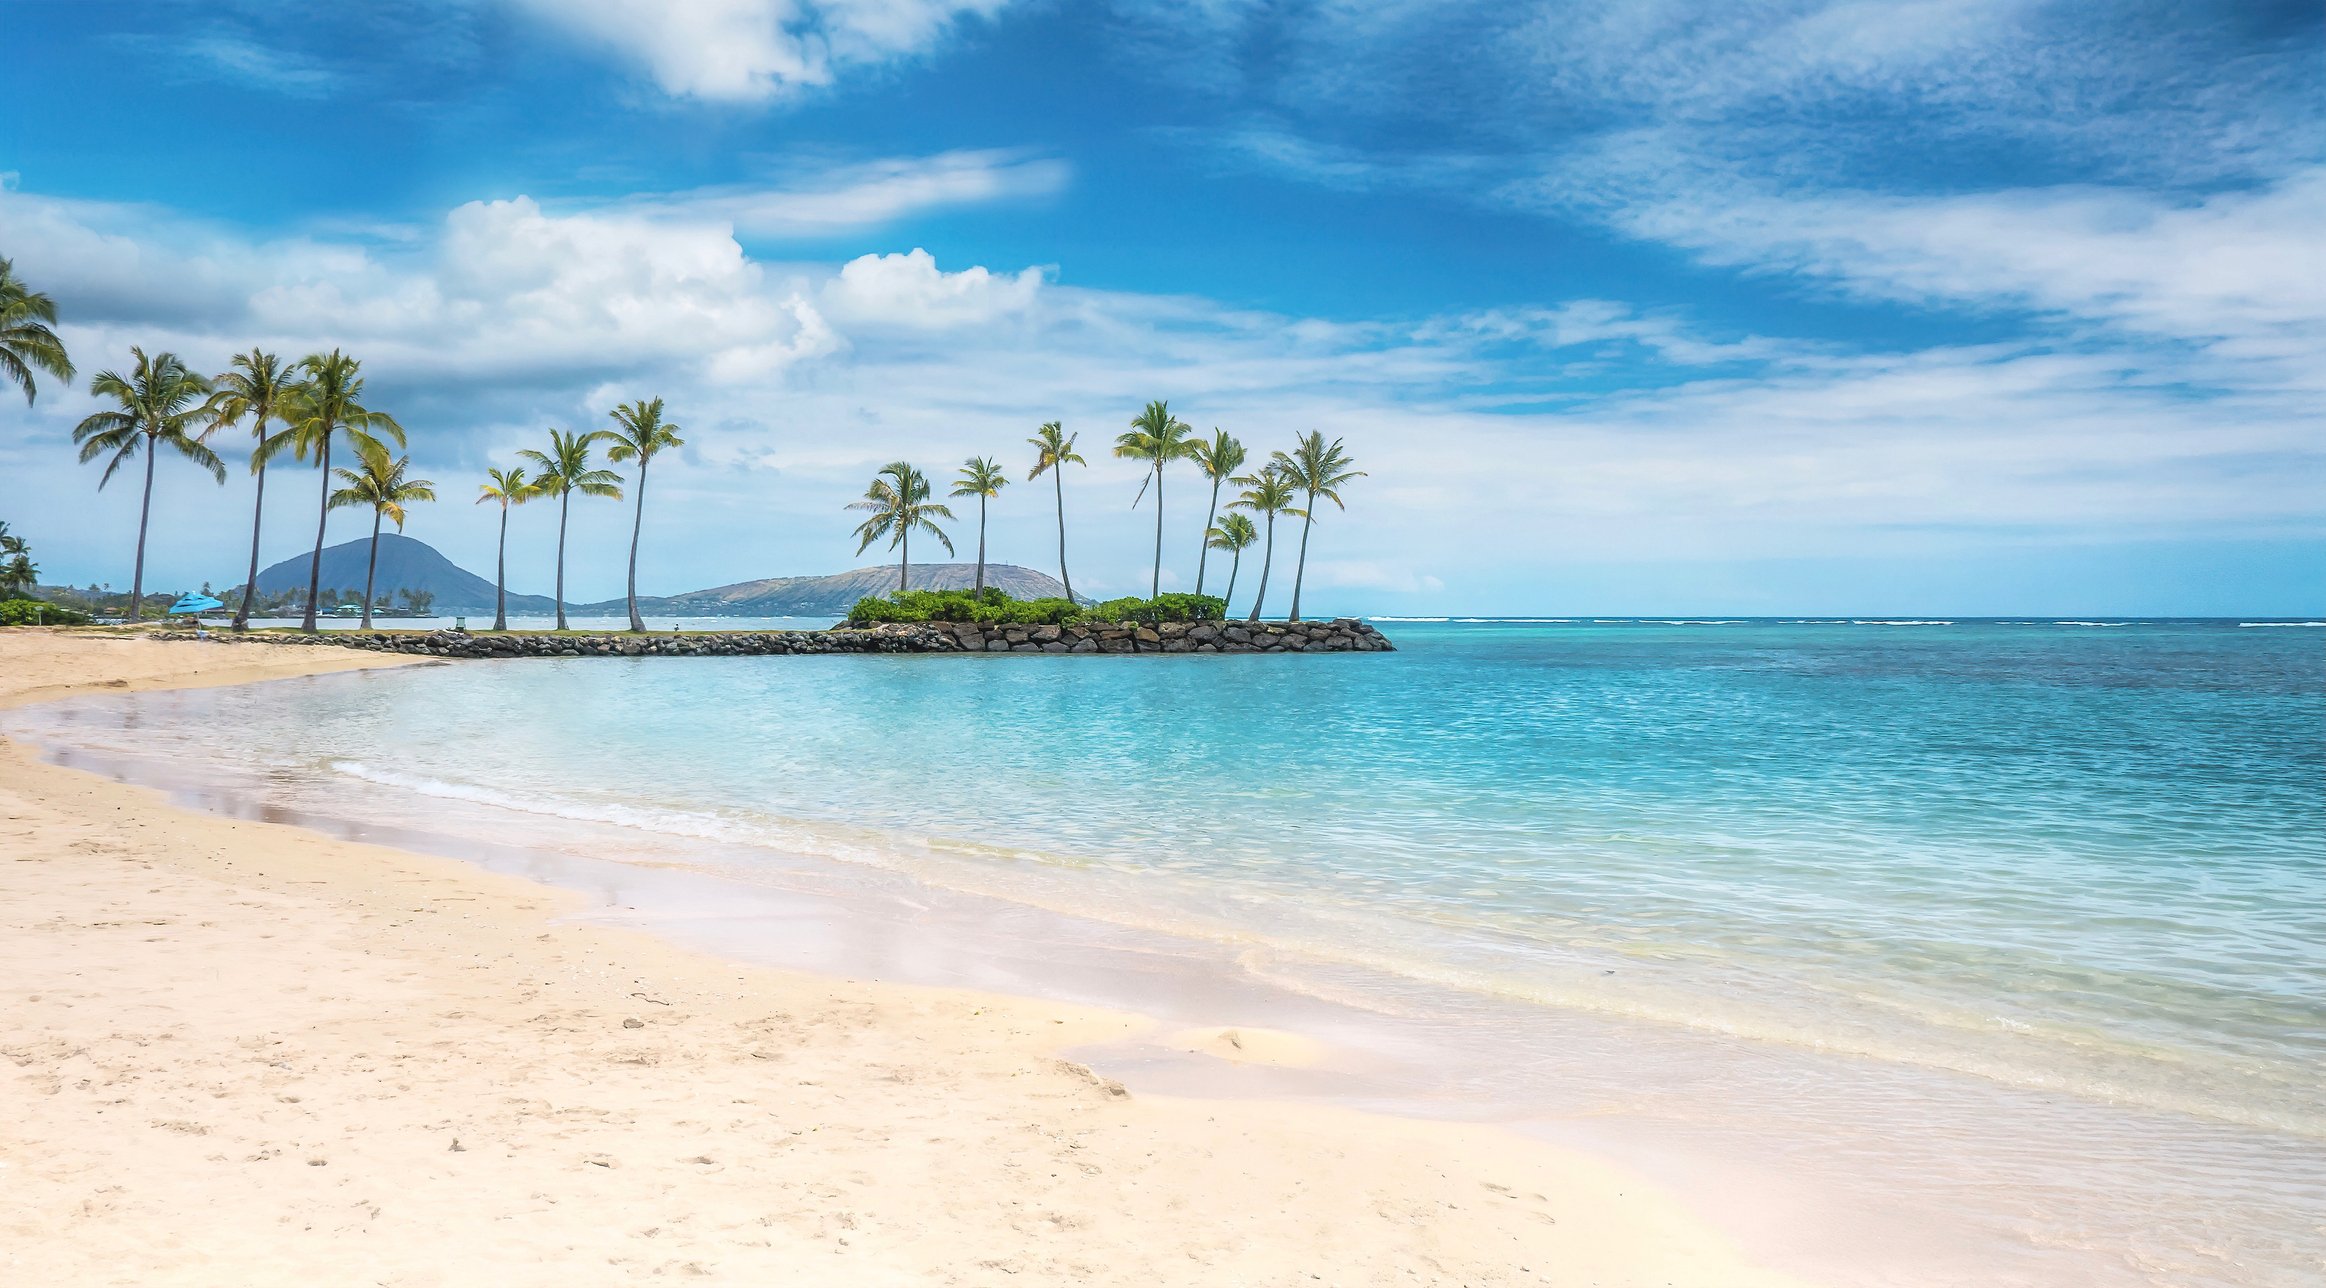 Kahala Beach with a view of coconut palm trees and Diamond Head in the background